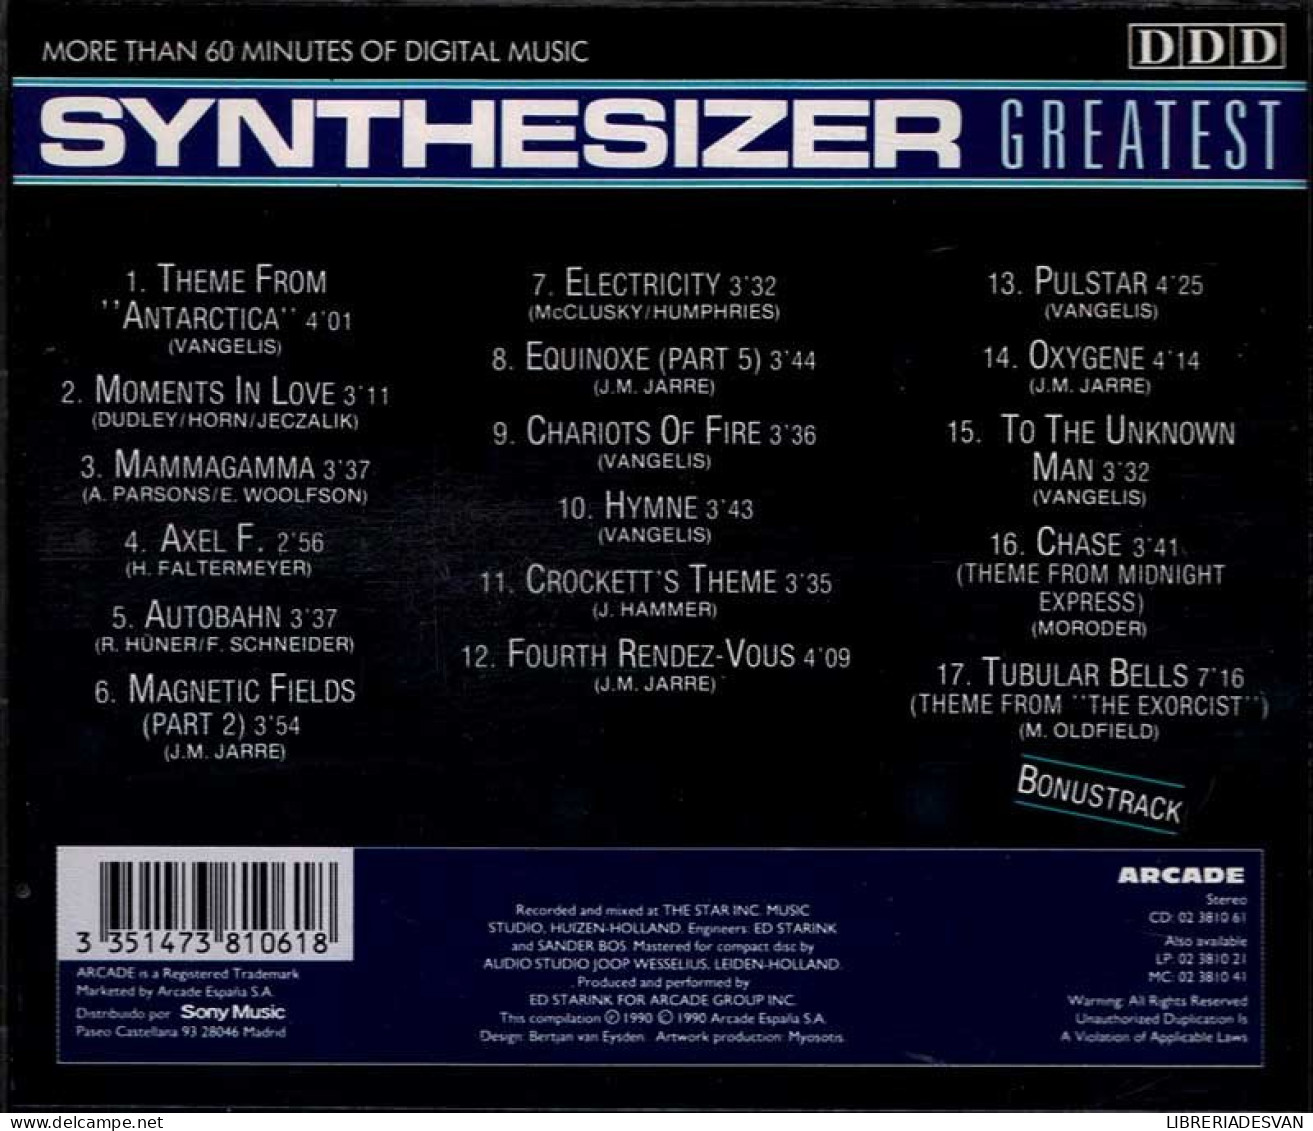 Synthesizer Greatest. CD - New Age